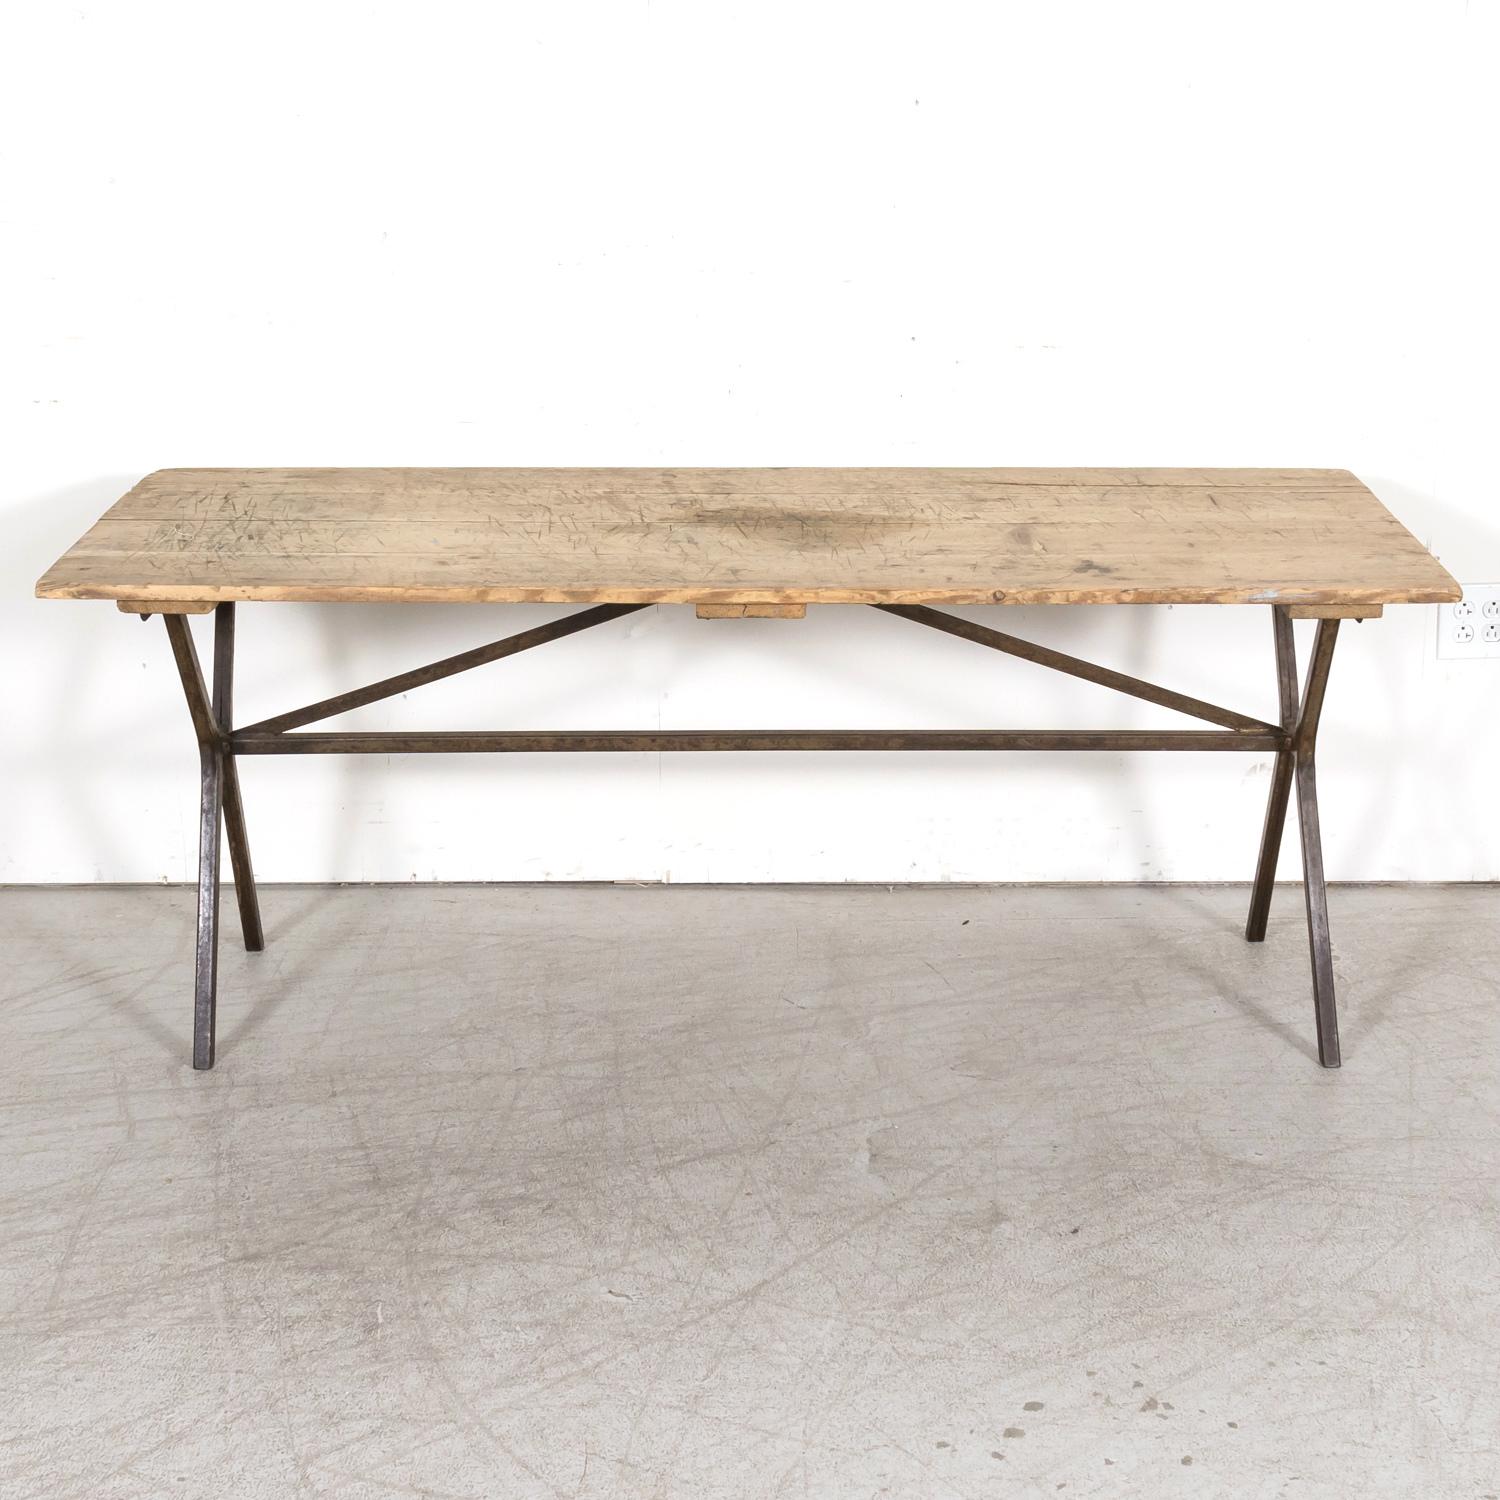 Early 20th century French bistro or pub table from Toulouse, having a typical rustic washed oak removable plank top and iron trestle base joined by iron stretchers that provide additional stability. This table would be perfect as a console table or